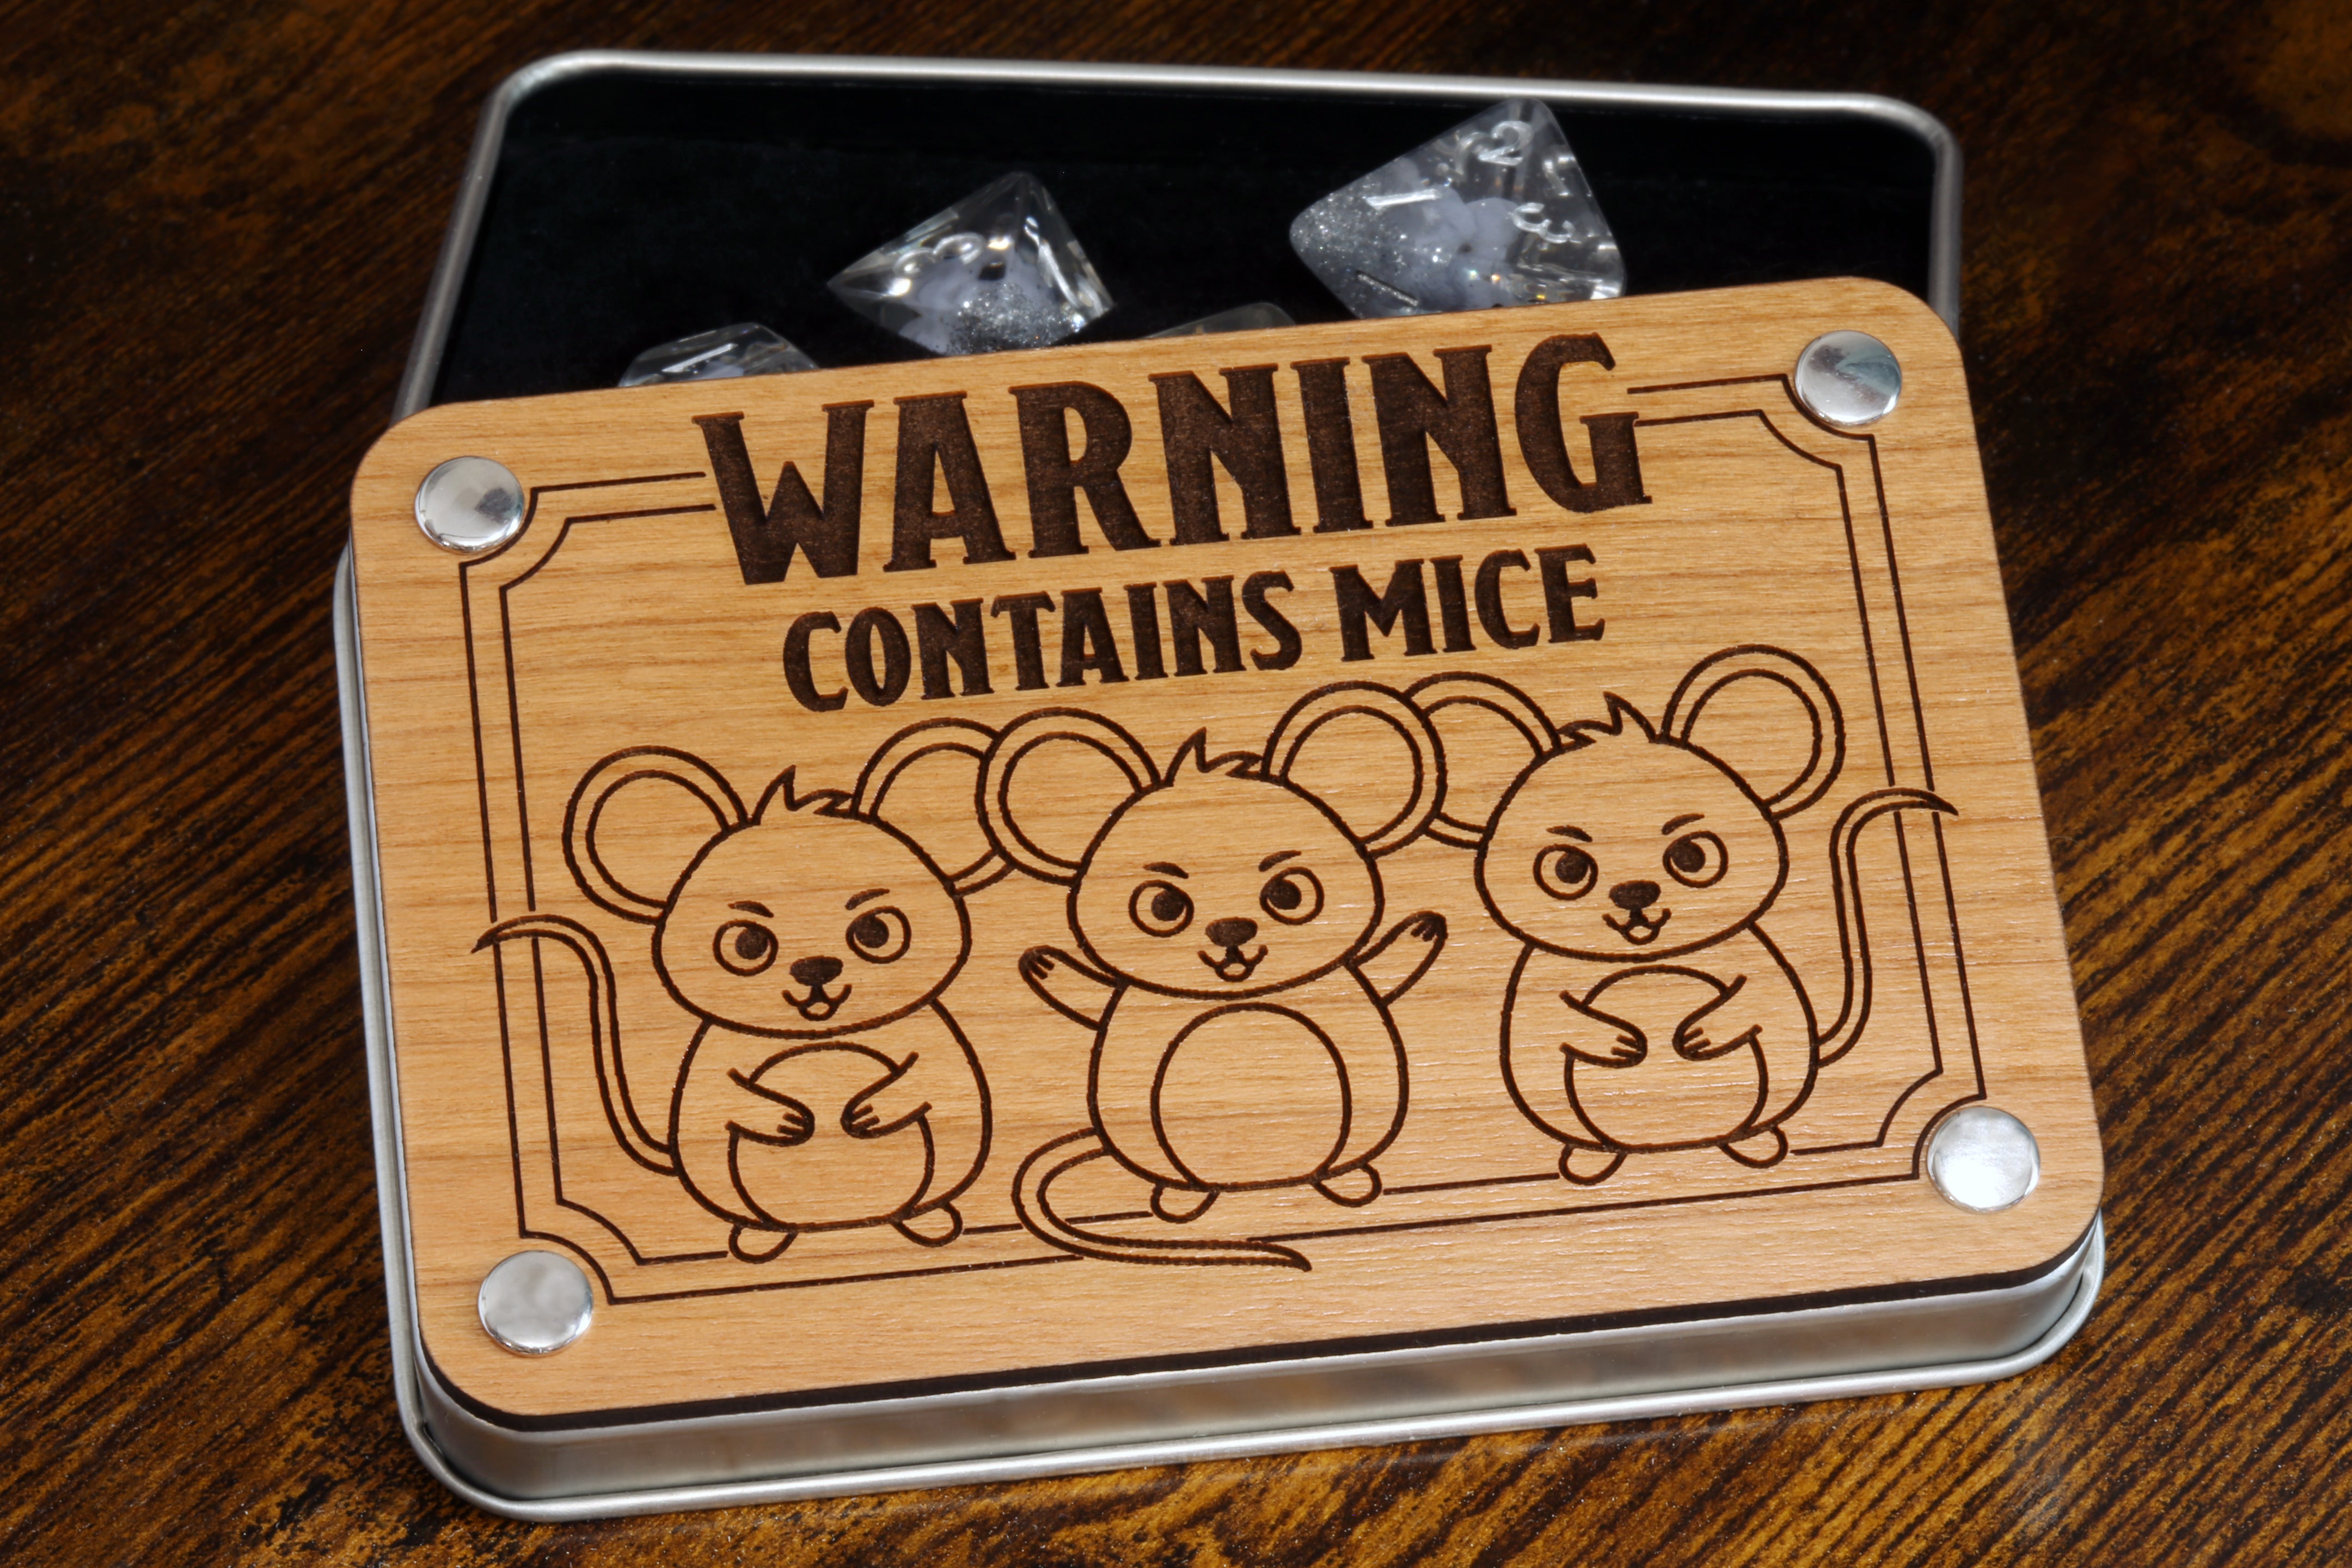 Warning ! Contains mice dice set with metal box